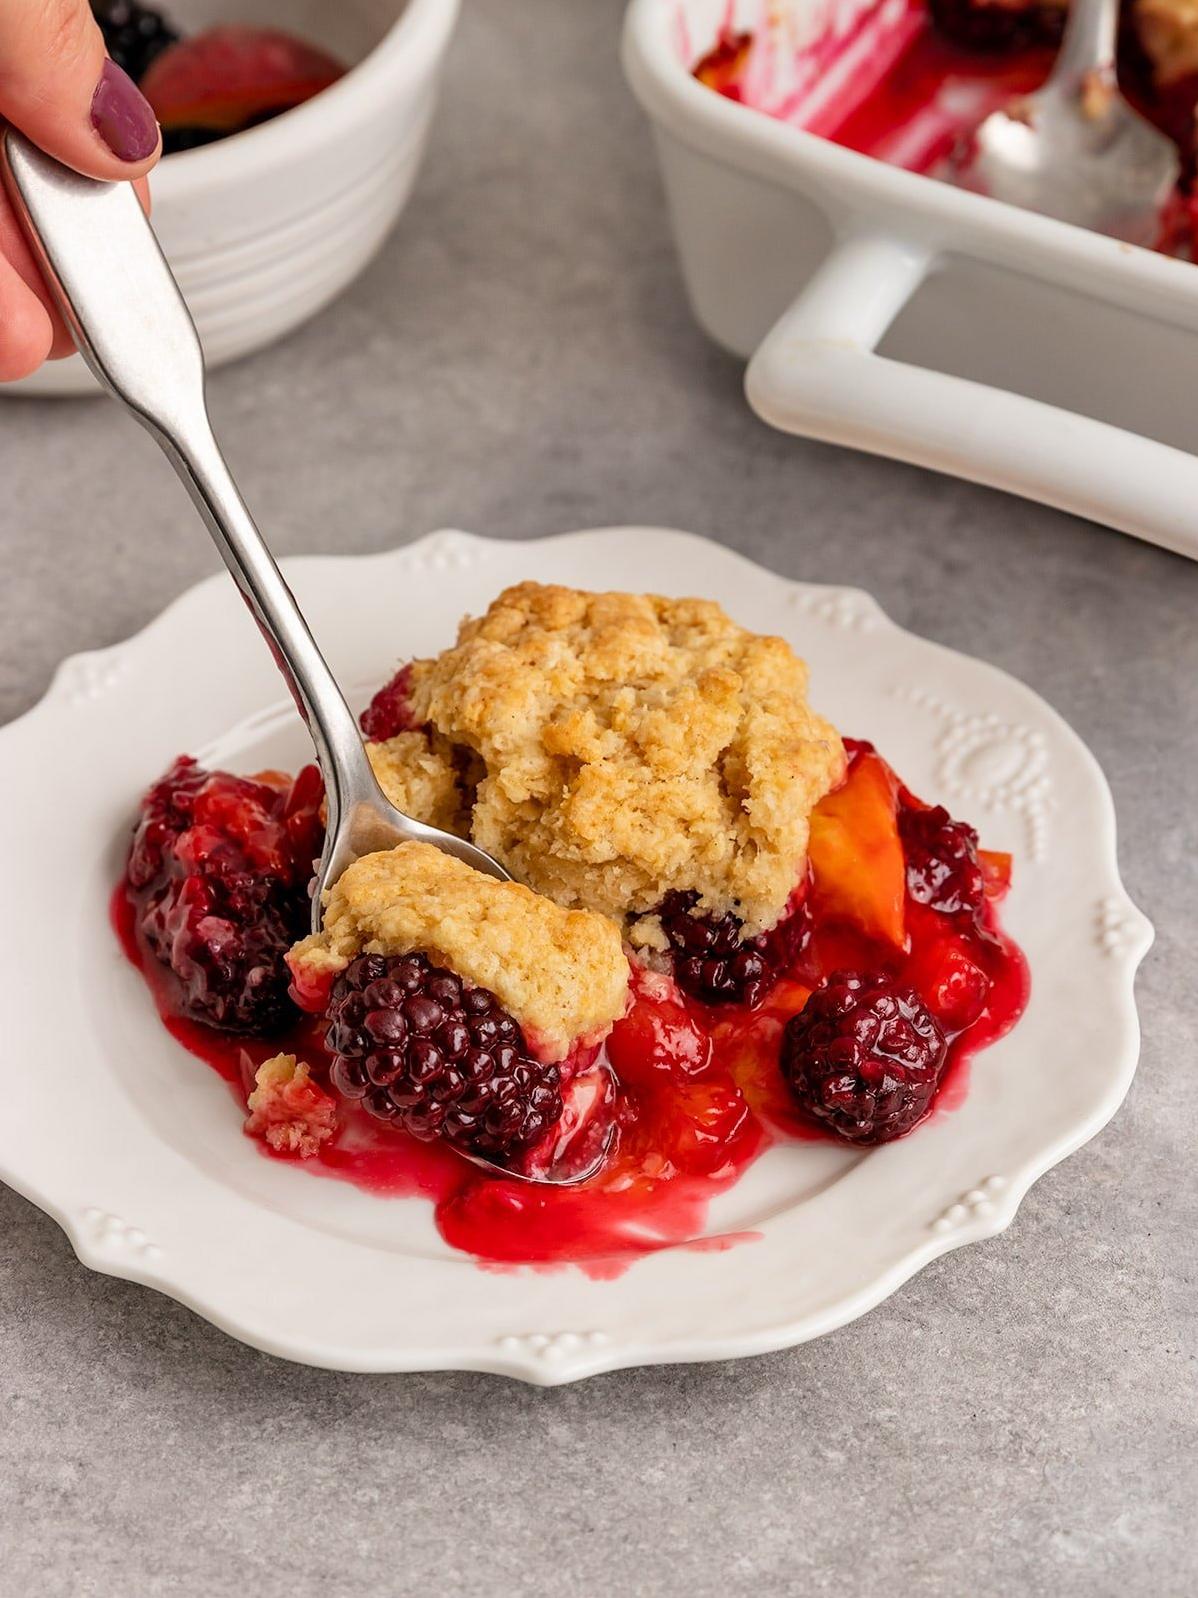  Freshly picked blackberries and peaches make the perfect filling for this vegan cobbler.